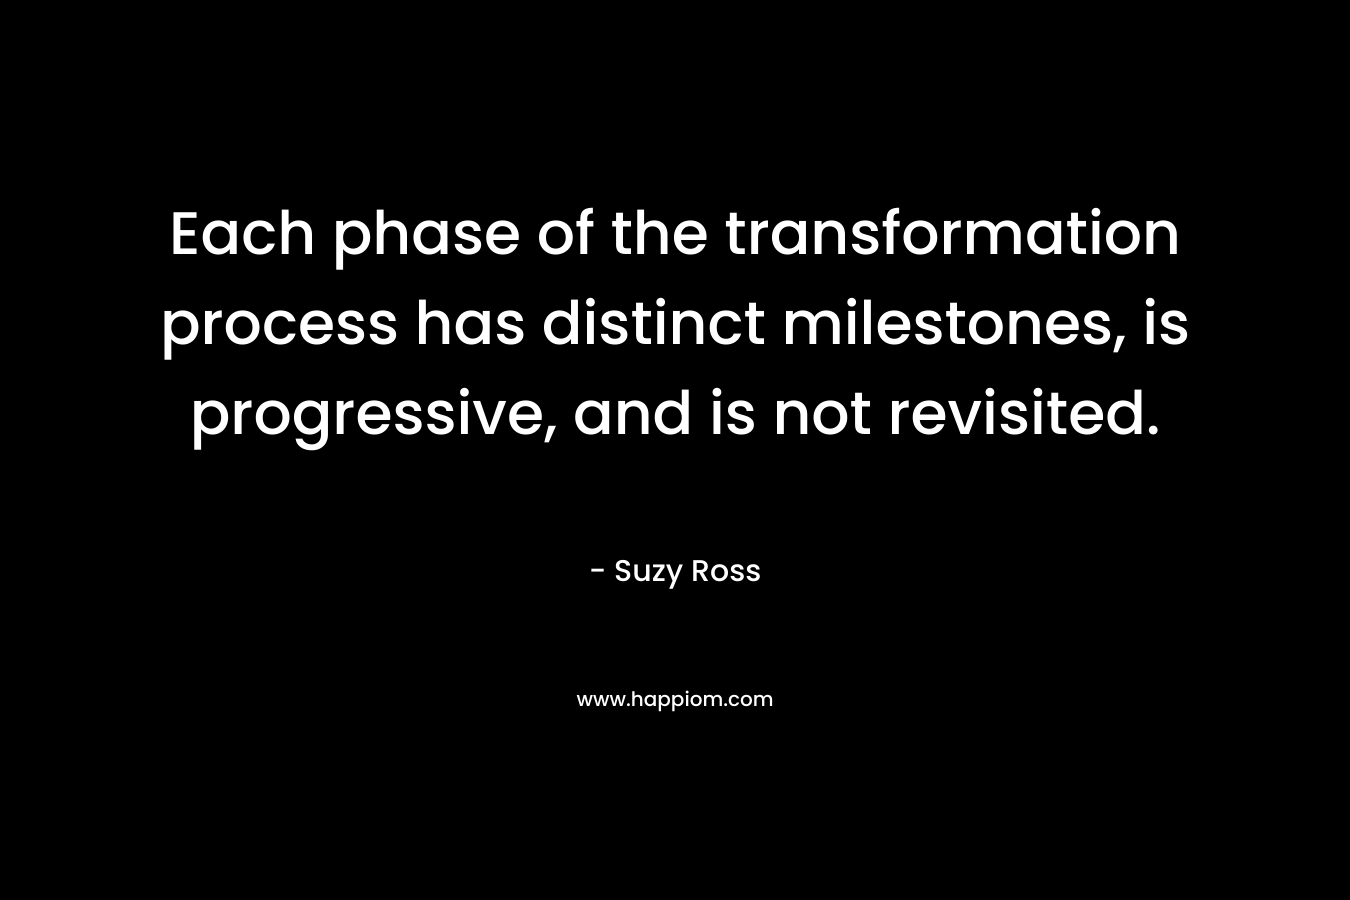 Each phase of the transformation process has distinct milestones, is progressive, and is not revisited. – Suzy Ross